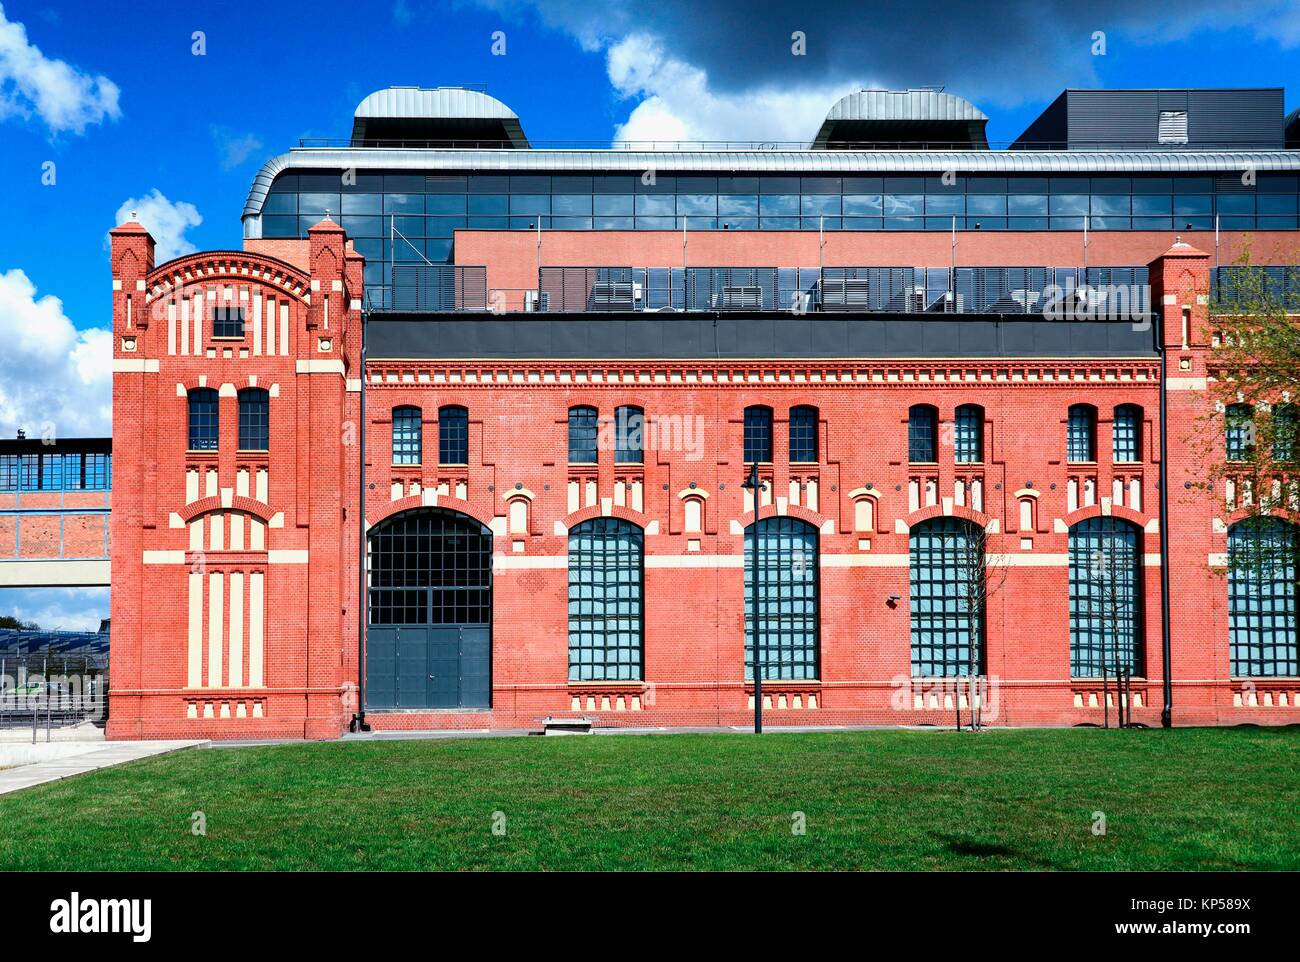 EC 1 - The first city power plant in Lodz was opened in 1907 at Targowa street and operated until 2001,from 2008 the whole complex of buildings of Stock Photo